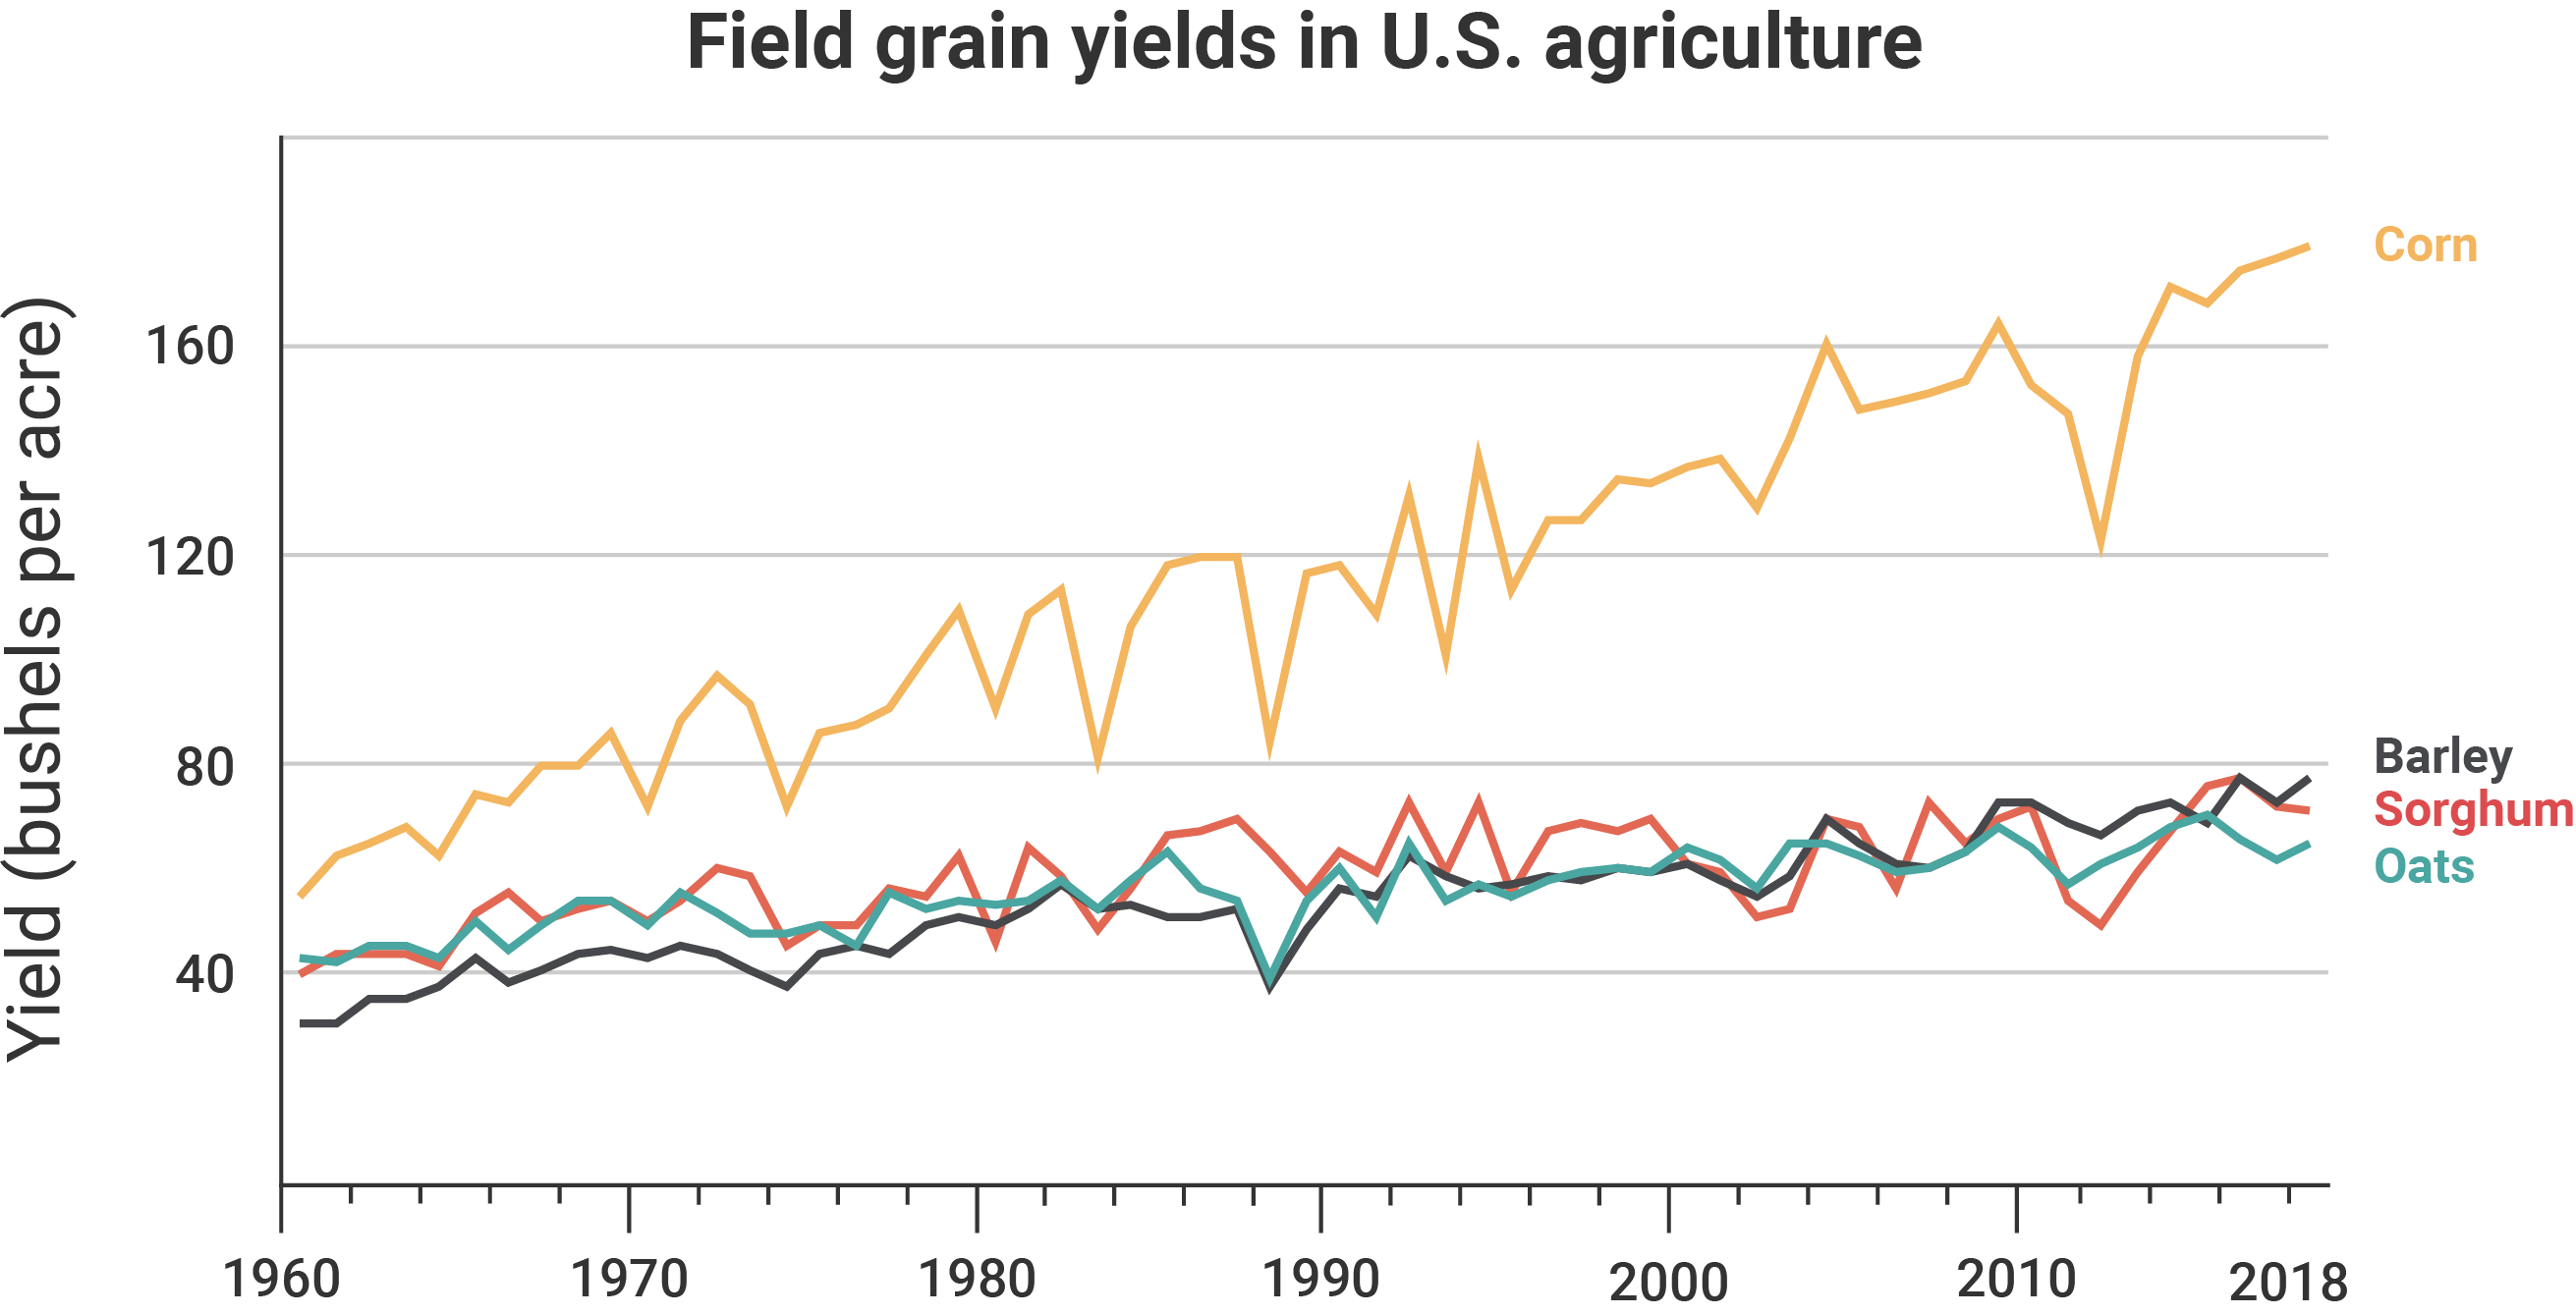 A graph showing field grain yields in U.S. agriculture from 1960 to 2018